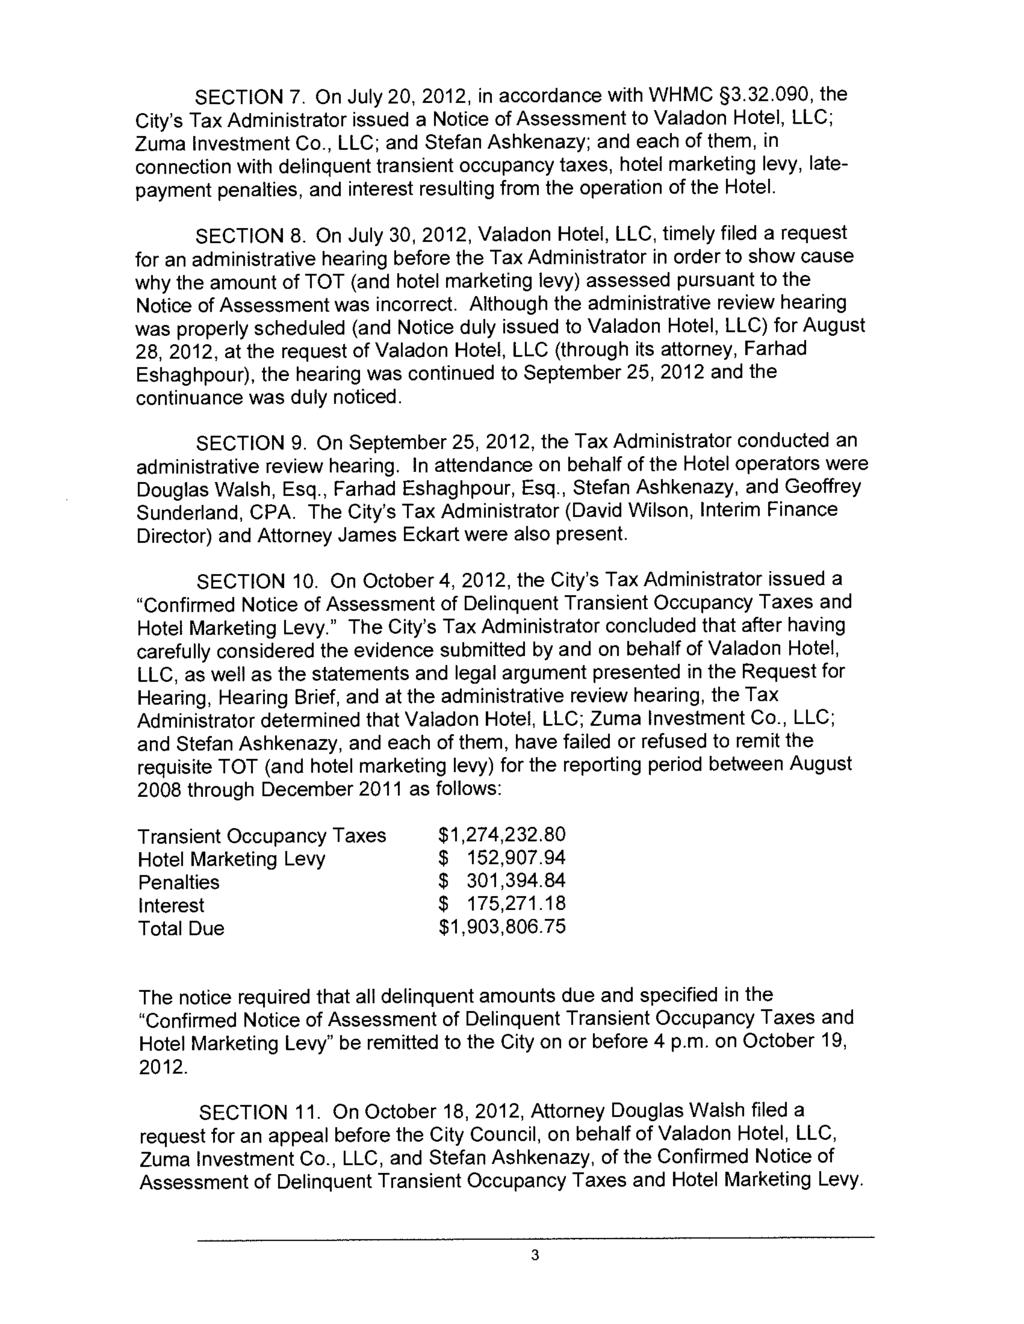 SECTION 7. On July 20, 2012, in accordance with WHMC 3.32.090, the City's Tax Administrator issued a Notice of Assessment to Valadon Hotel, LLC; Zuma Investment Co.